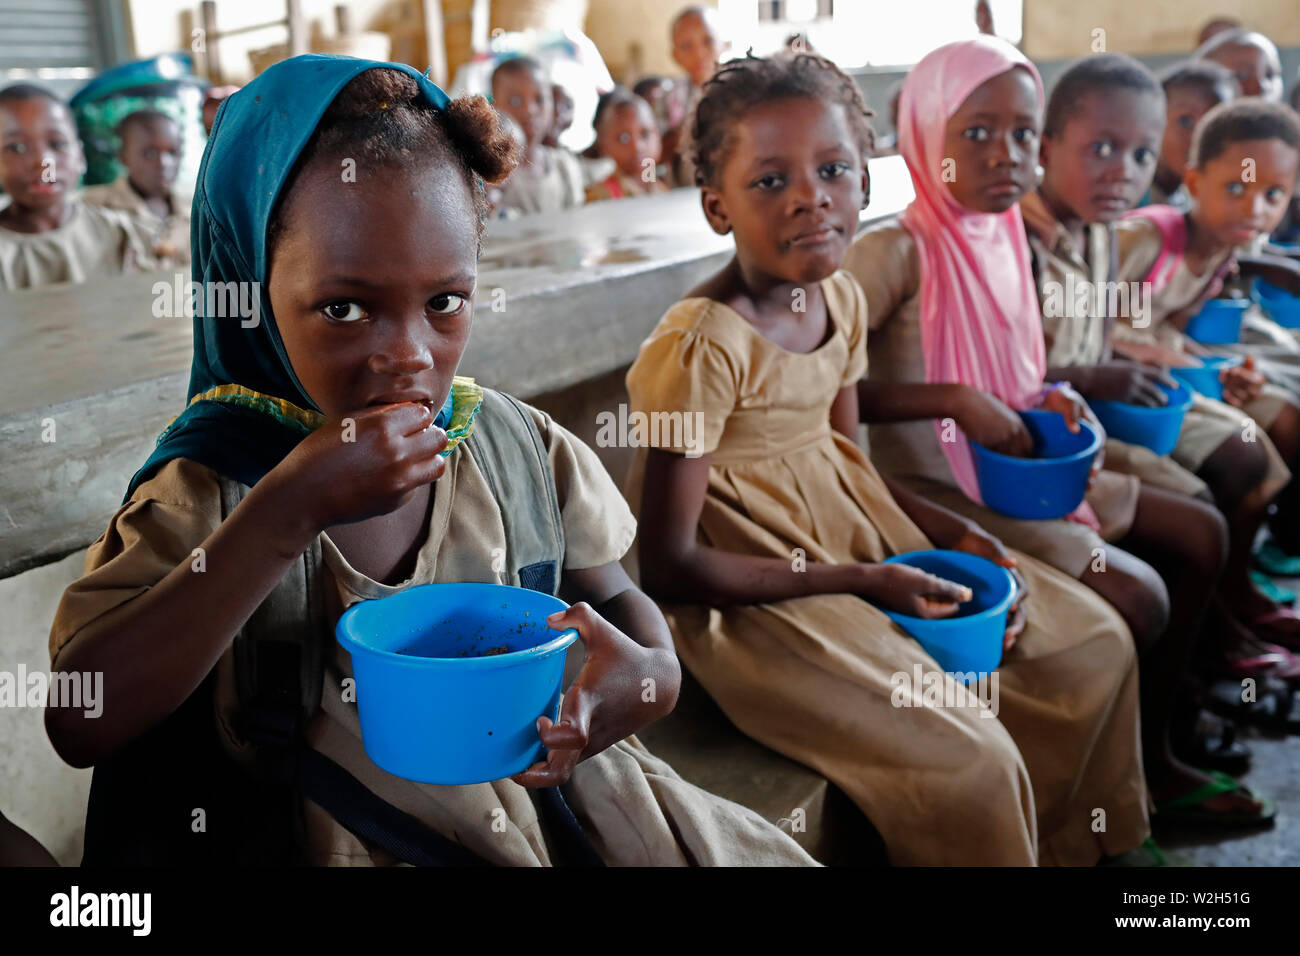 Group of Kids in the Canteen of the Elementary School Stock Image - Image  of african, groceries: 120283225